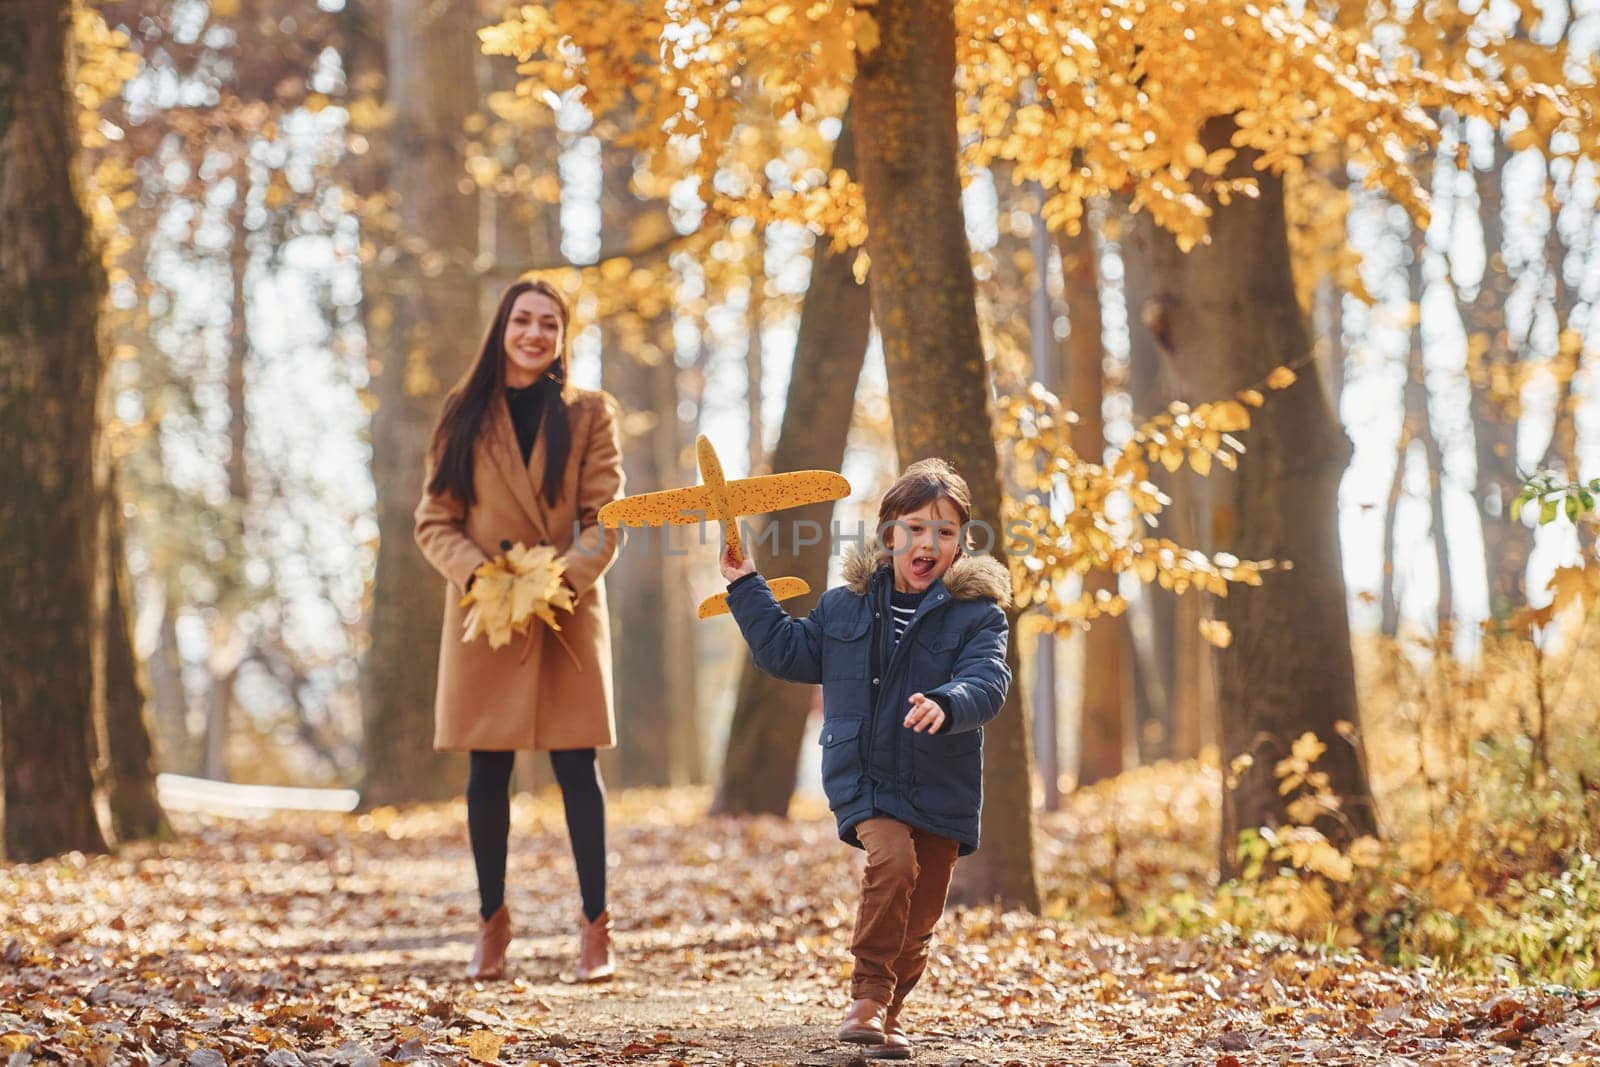 Playing with leaves. Mother with her son is having fun outdoors in the autumn forest.